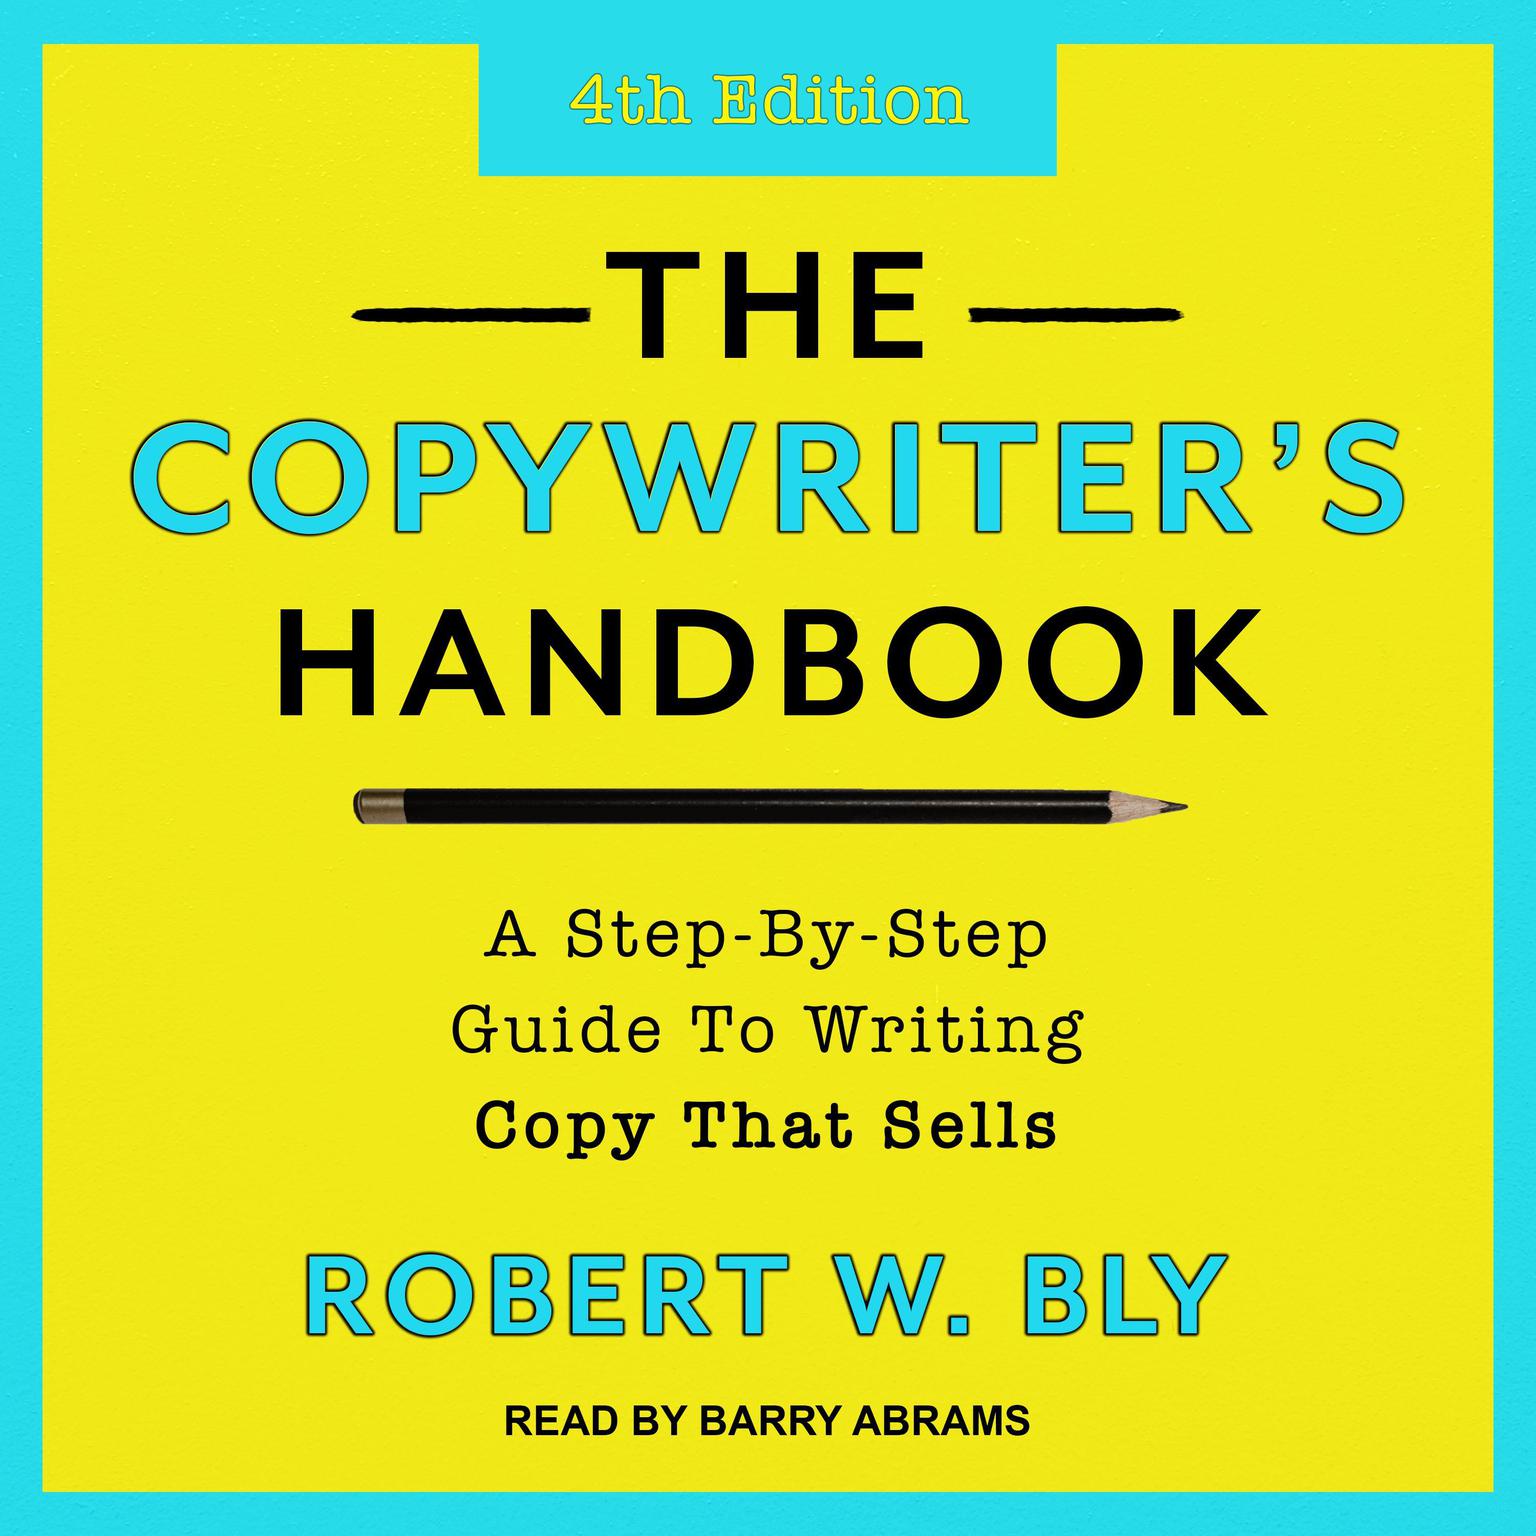 The Copywriters Handbook: A Step-By-Step Guide To Writing Copy That Sells (4th Edition) Audiobook, by Robert W. Bly